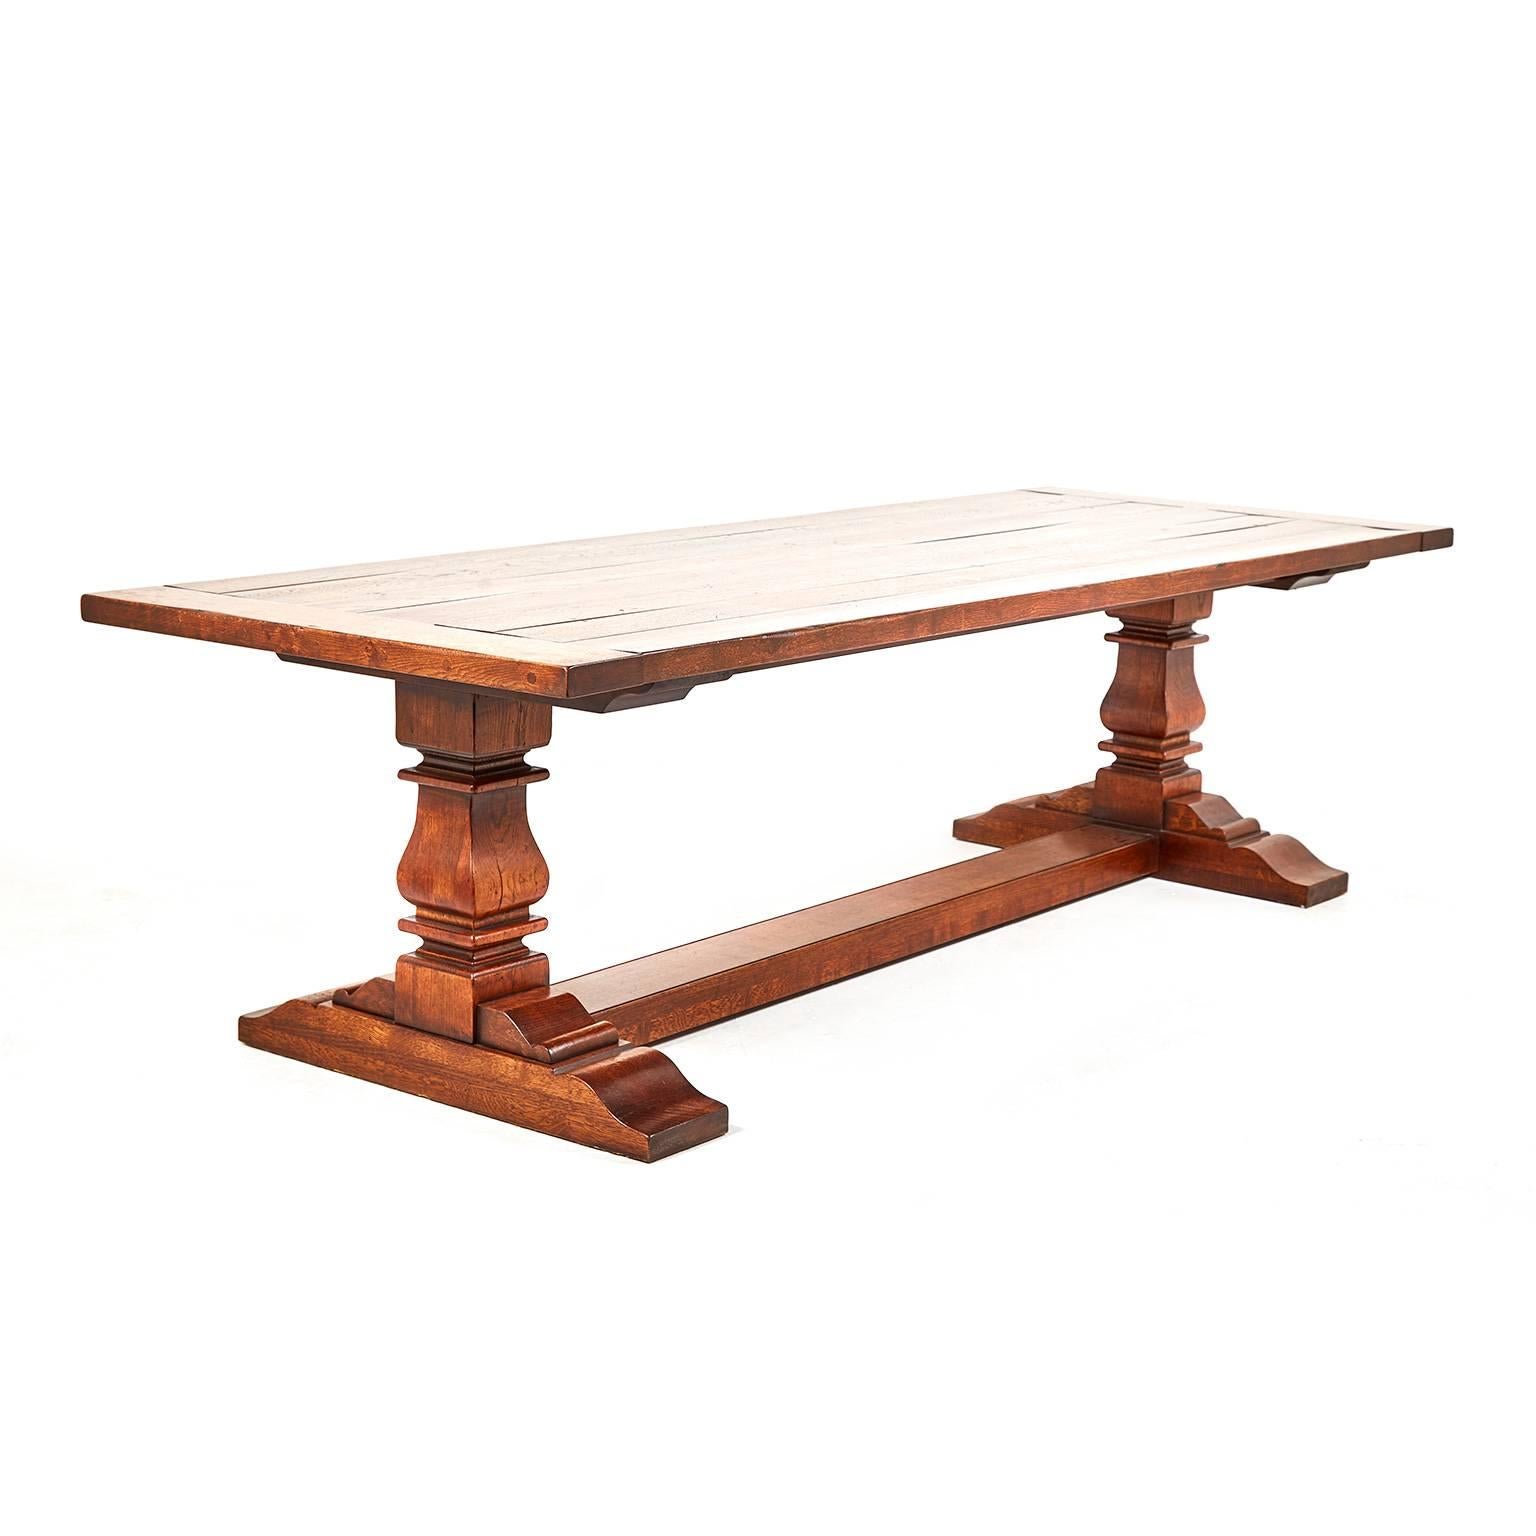 At 9 feet long, this is an unusually-large and fine-quality ‘refectory’ or trestle table, English-made and solid white oak throughout. Although the quality of construction and patina suggest an older piece, this is relatively new table and heavy,